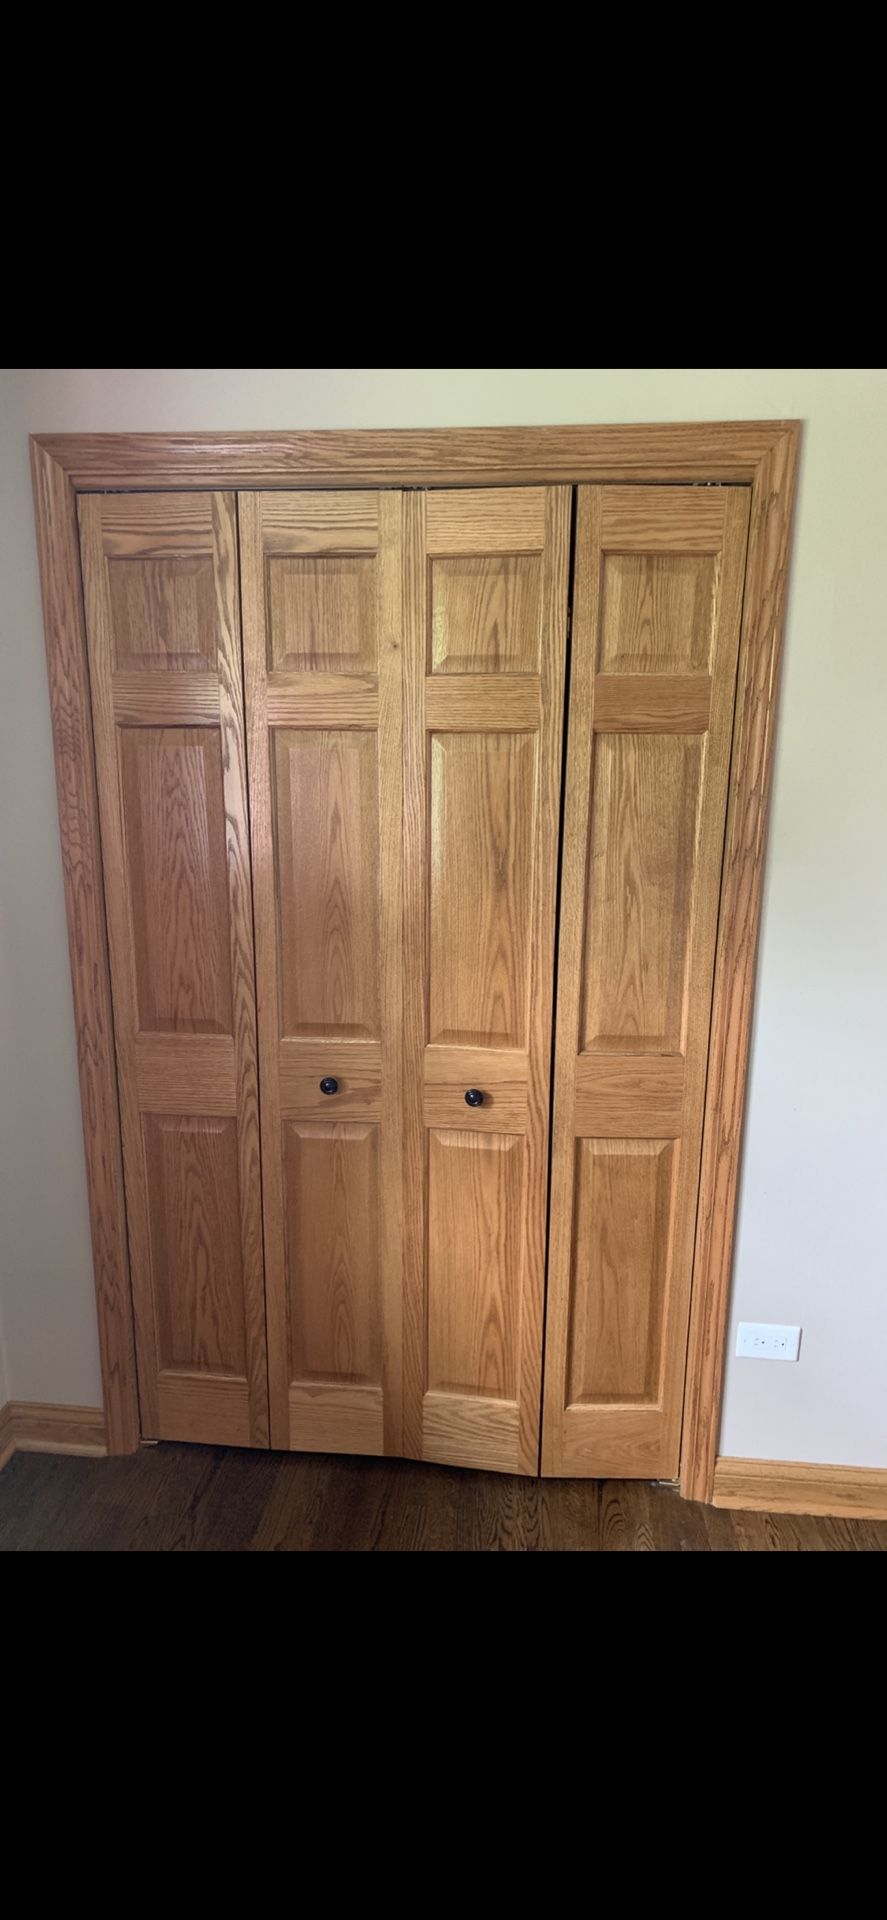 Solid Oak Closet doors come with frame size 48x80